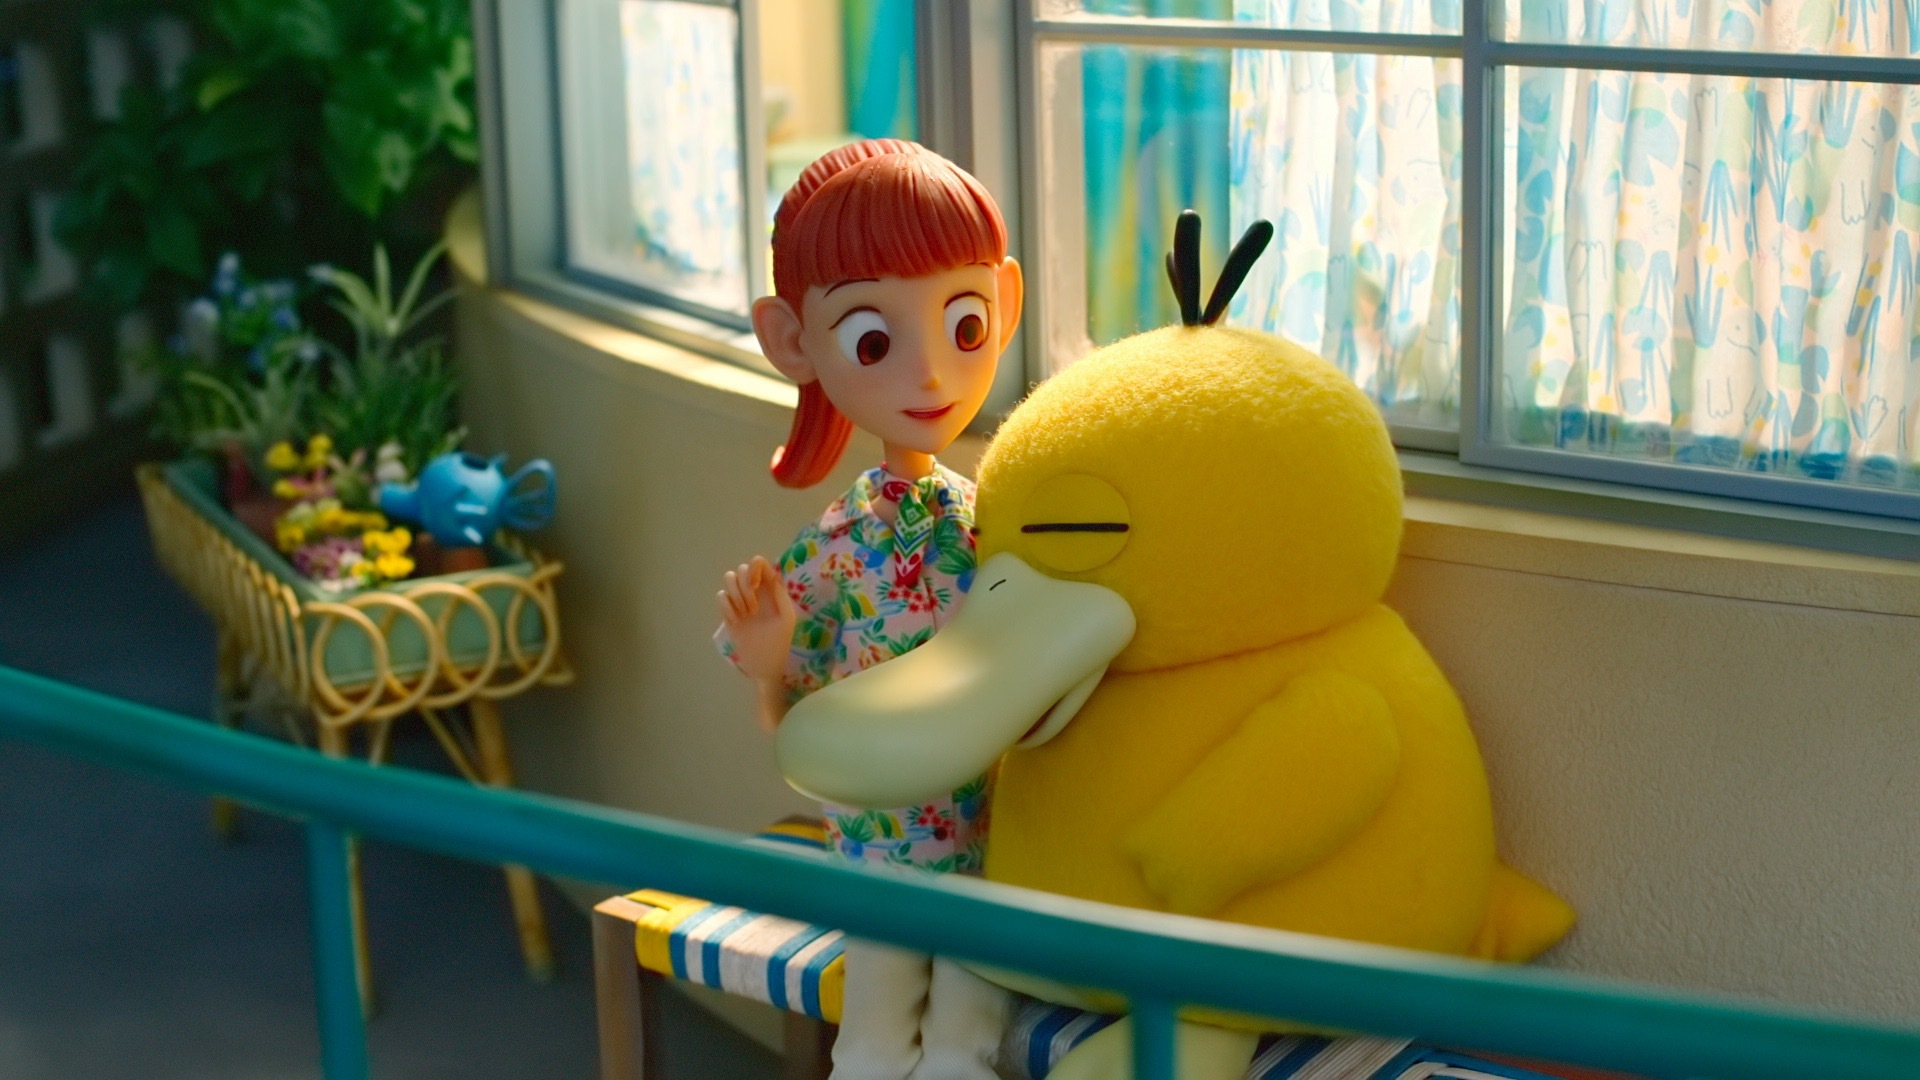 A still from the stop-animation show Pokemon Concierge. It shows Haru and Pysduck sitting outside and eating ice cream. The Pysduck is cuddled up next to her. Pysduck is made with a fuzzy, felt-like cloth.